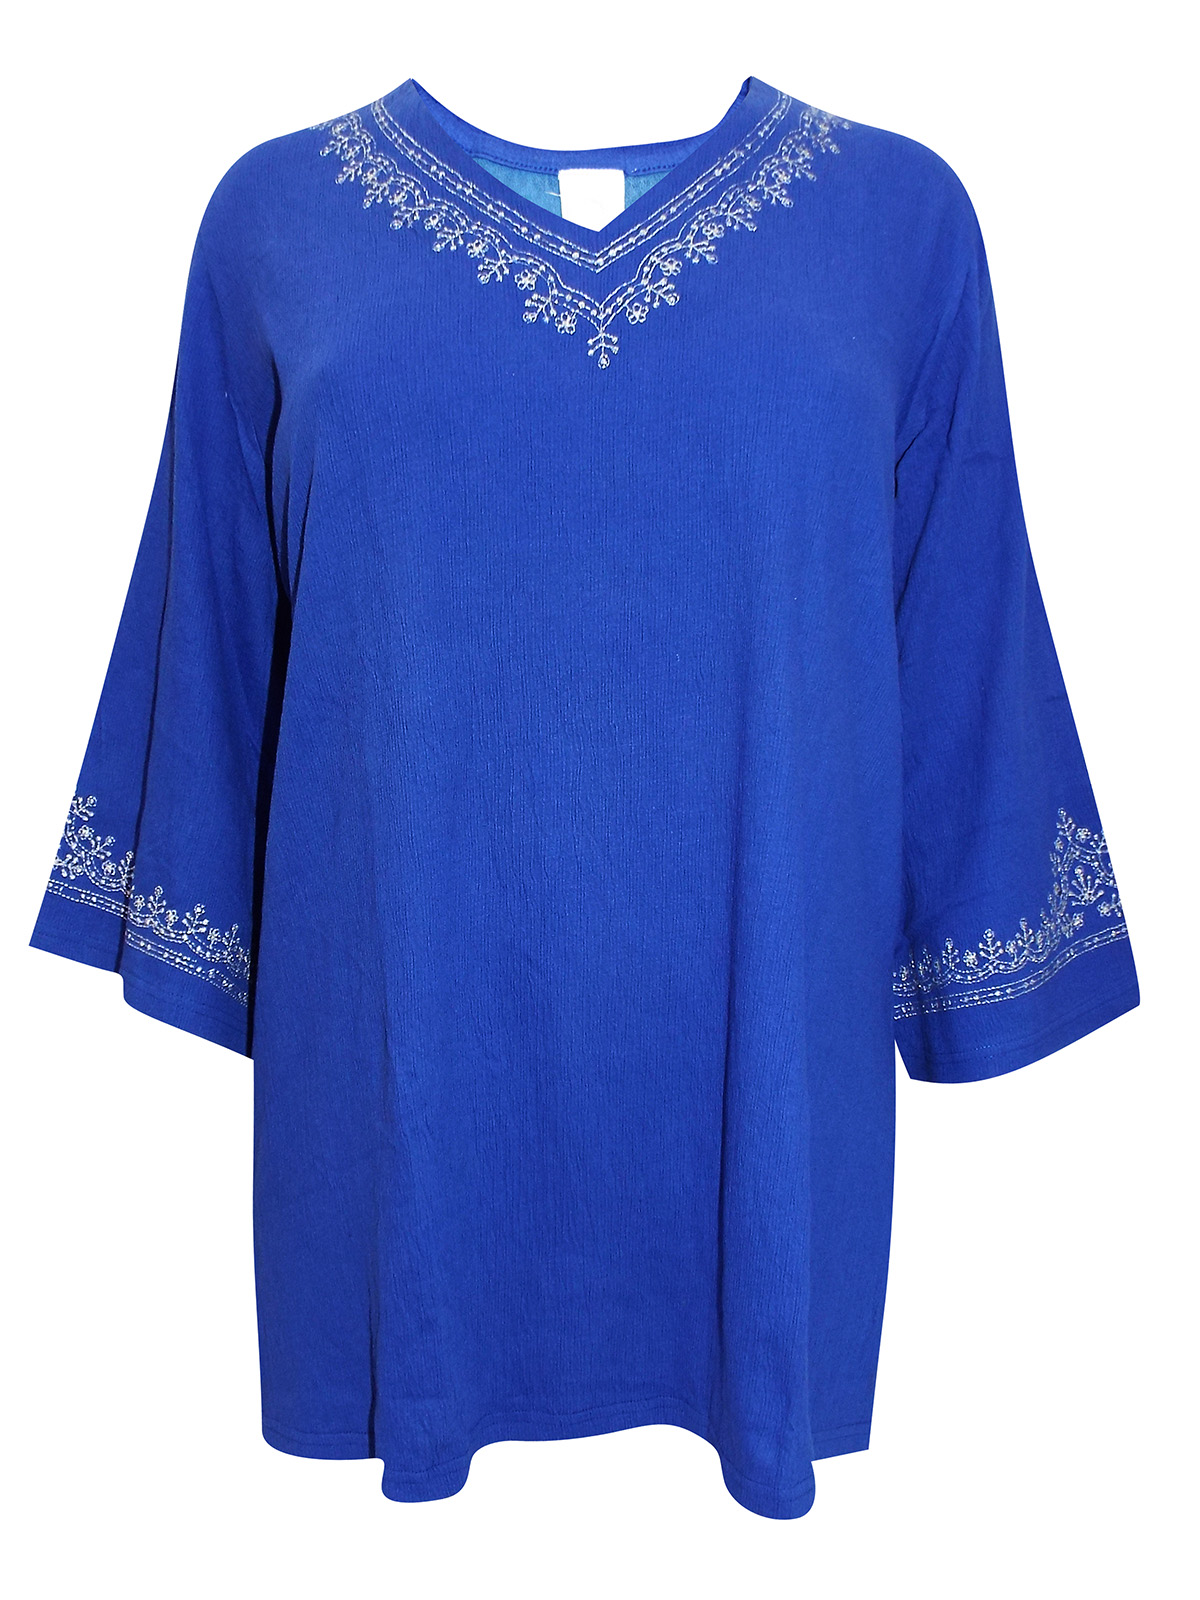 Roaman's - - Roamans ASSORTED Embroidered Trim Top - Plus Size 16/18 to ...